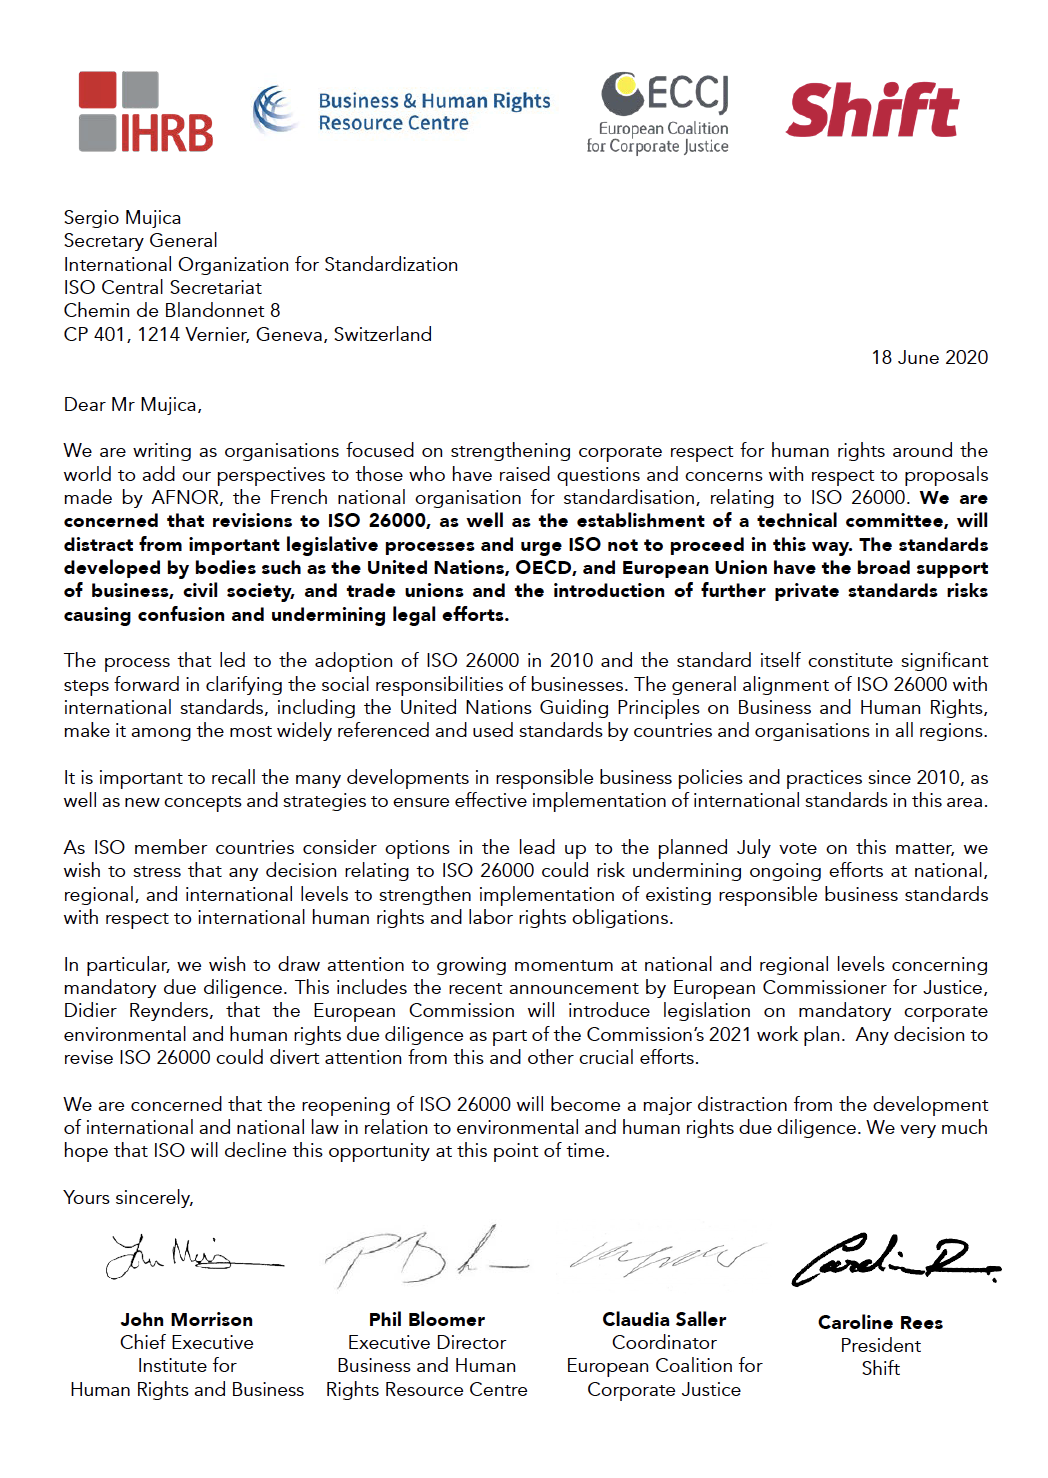 Letter to the Secretary-General of ISO on the proposals to revise ISO 26000